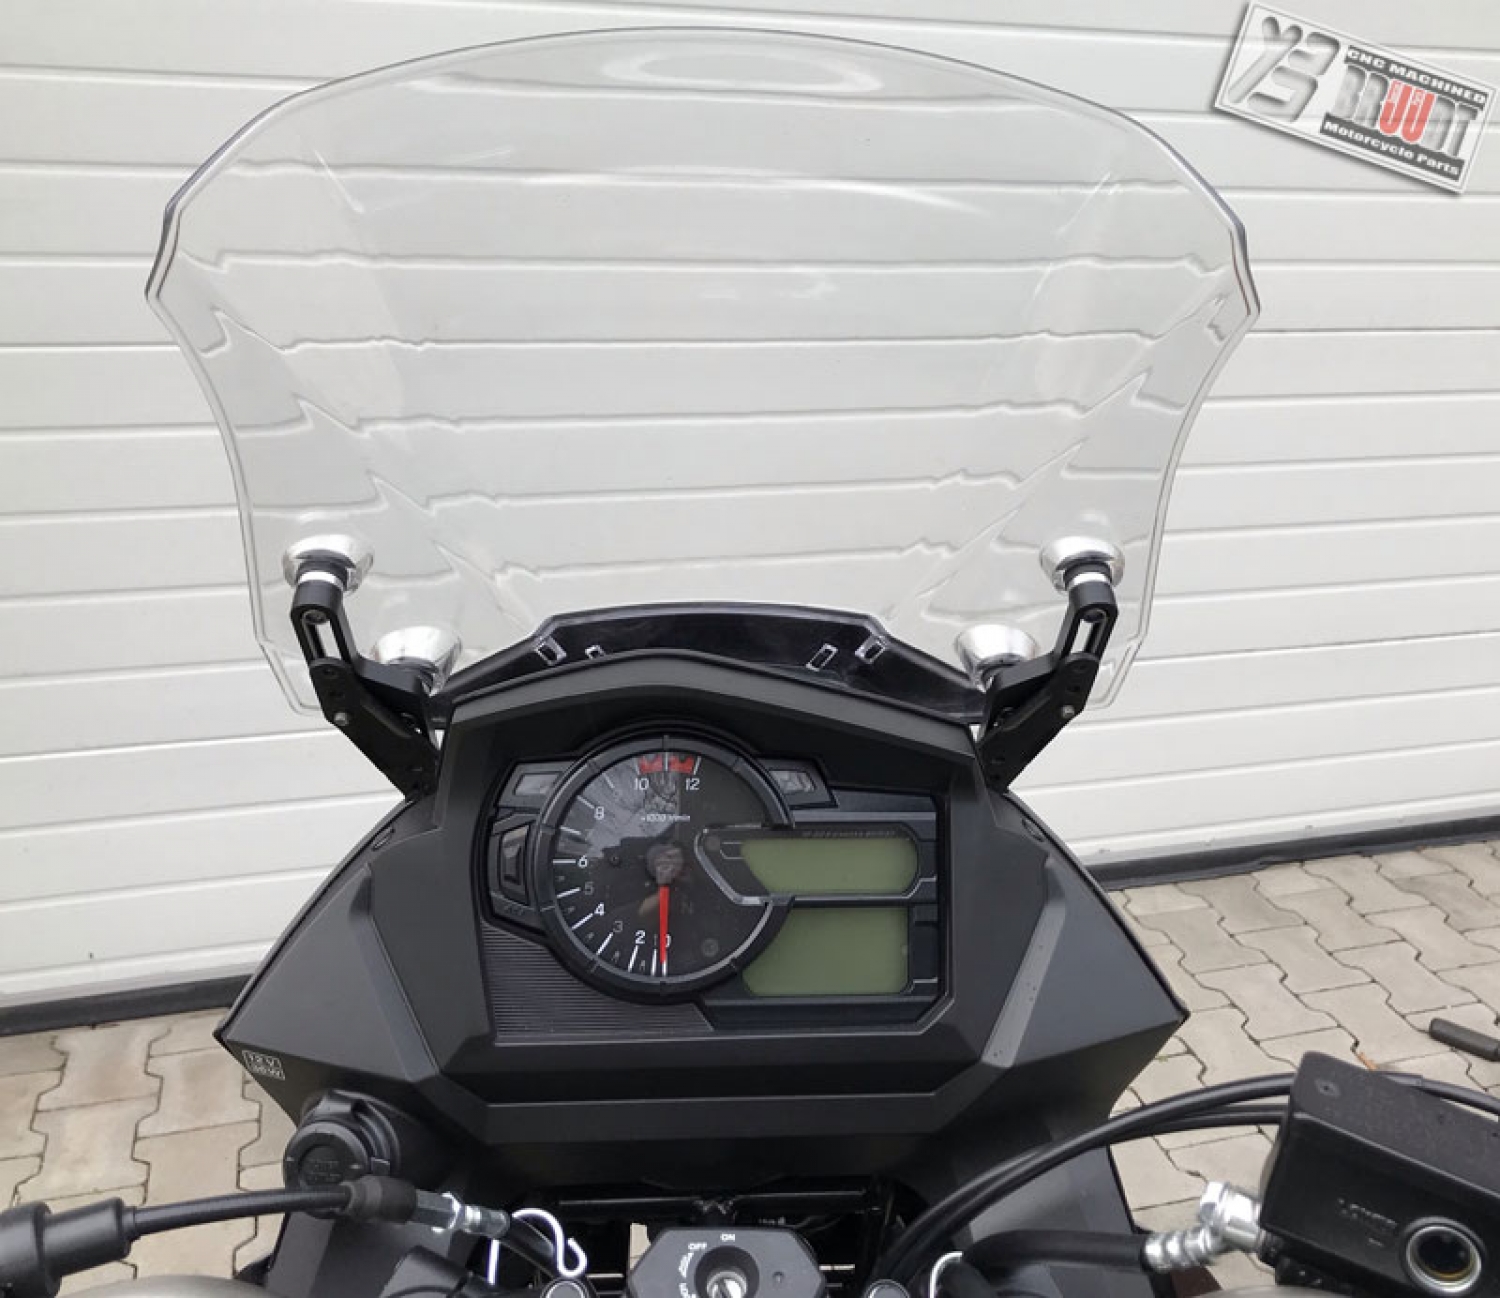 BRUUDT Windscreen Adjusters for the Suzuki DL650 V-Strom year 2017 and later models.